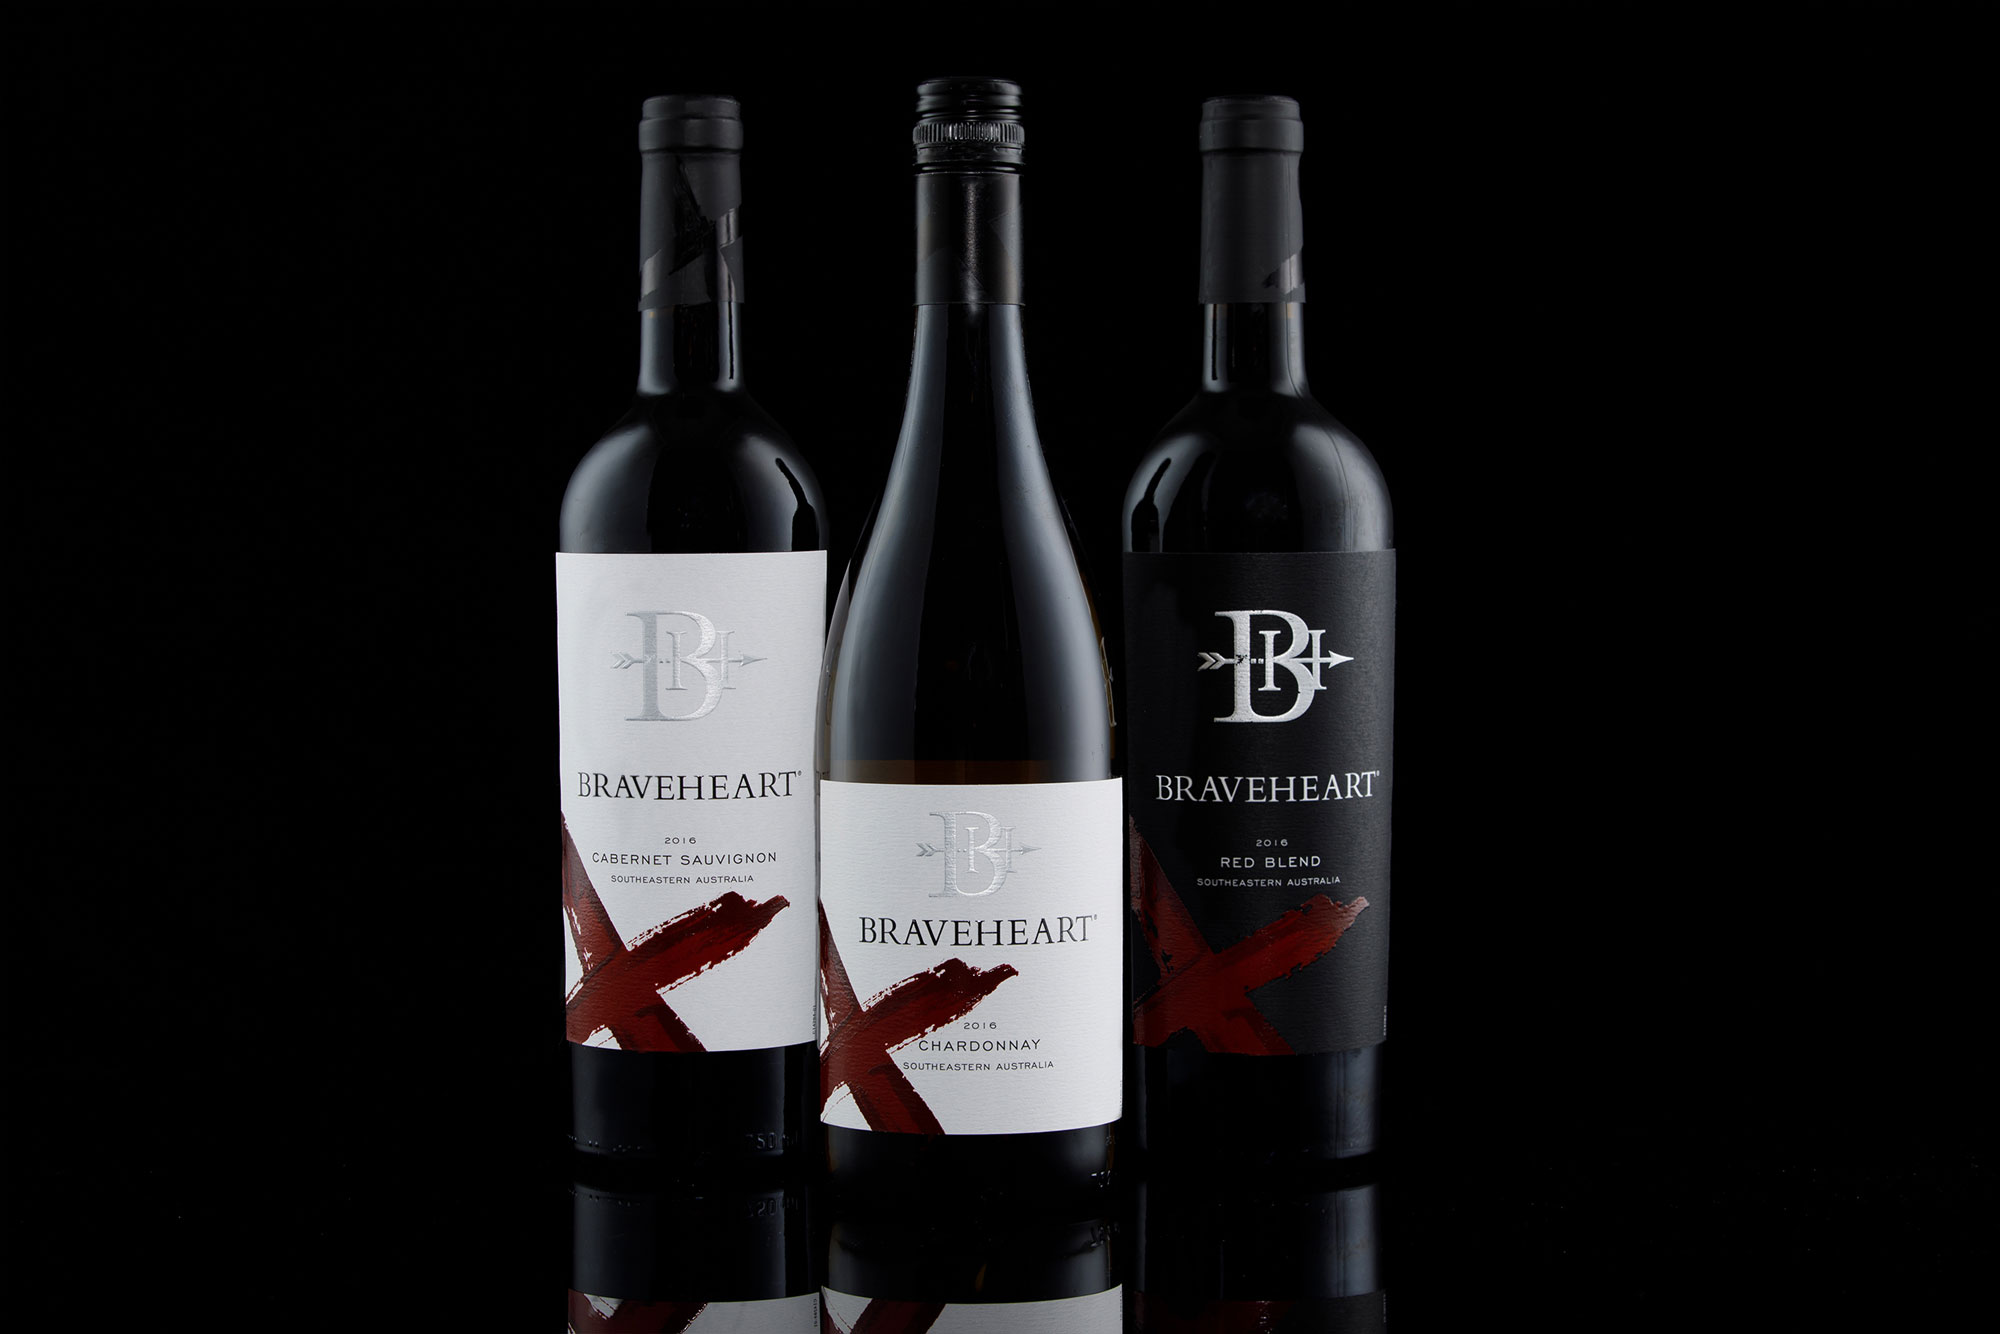 Winter_Products_wine-1078_Braveheart_retouched_web_edited.jpg